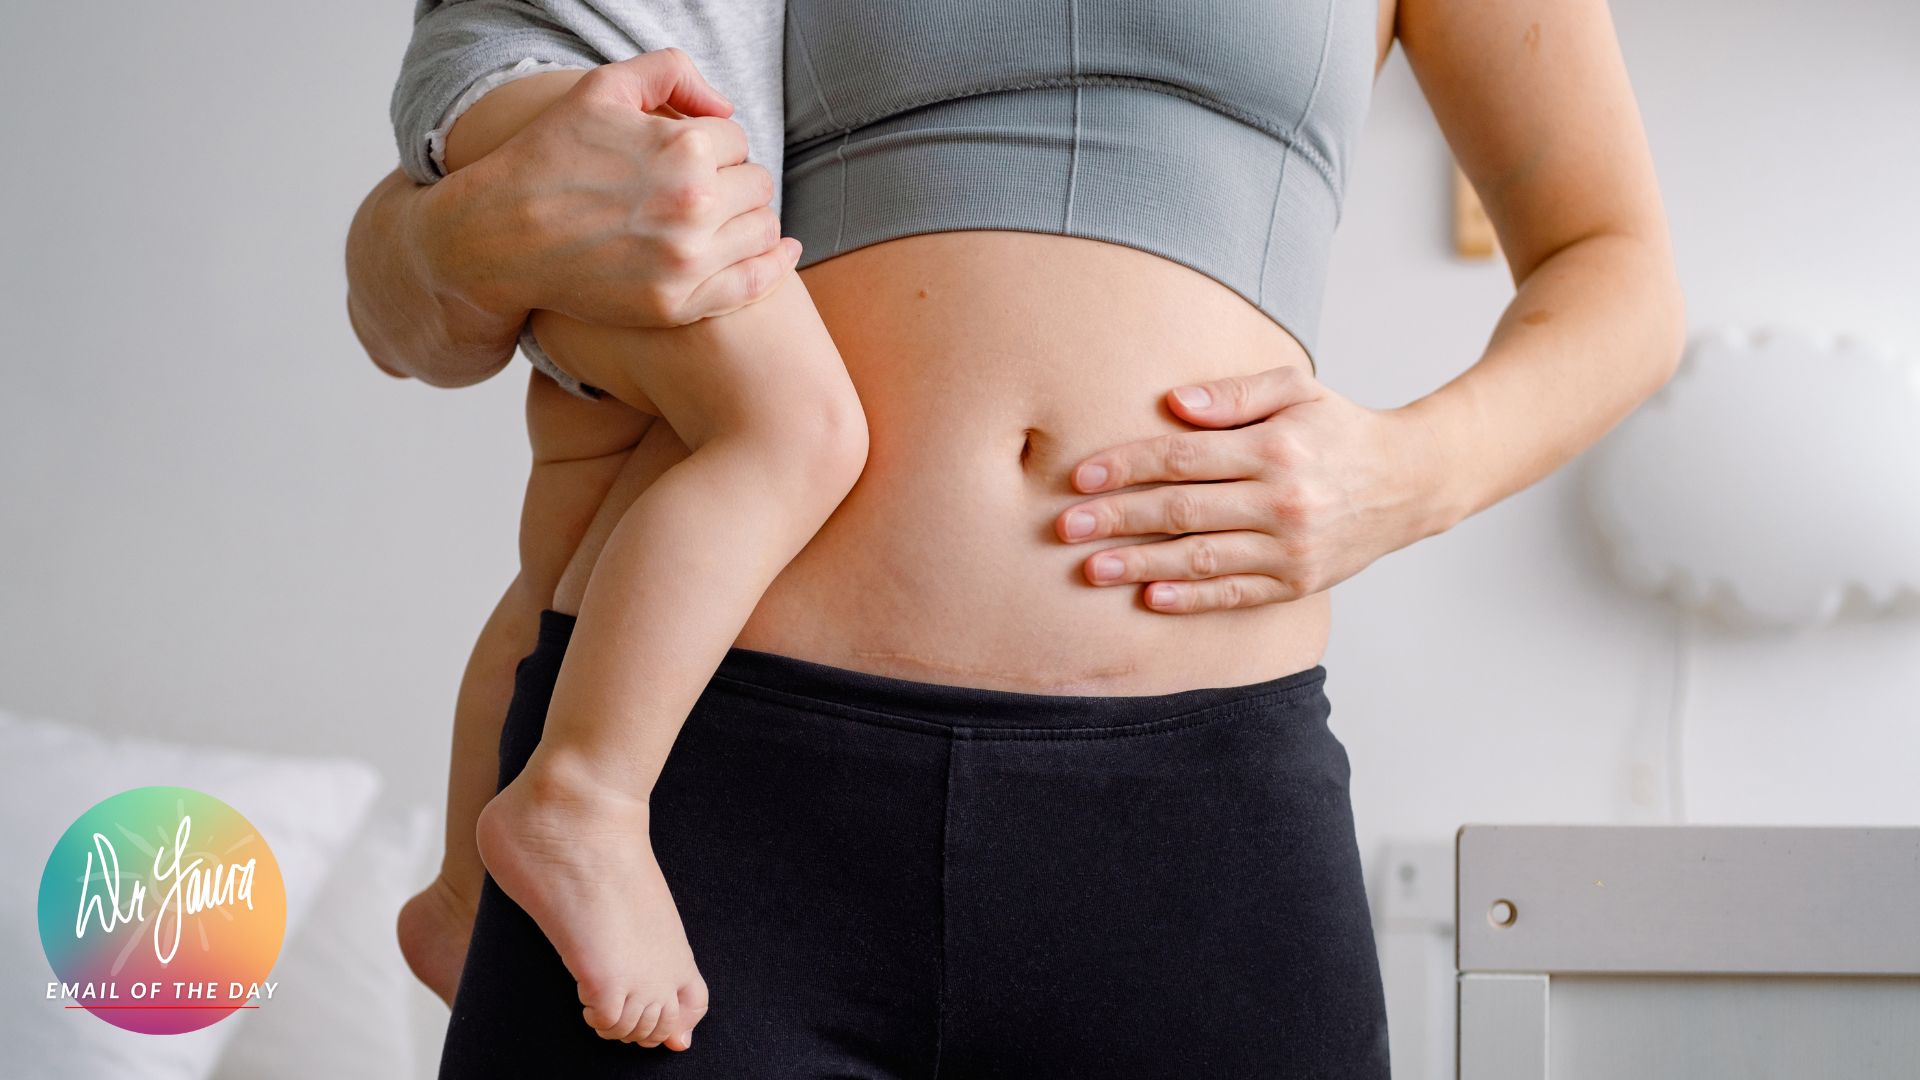 Email of the Day: My Friend Said Having Babies Would Ruin My Body